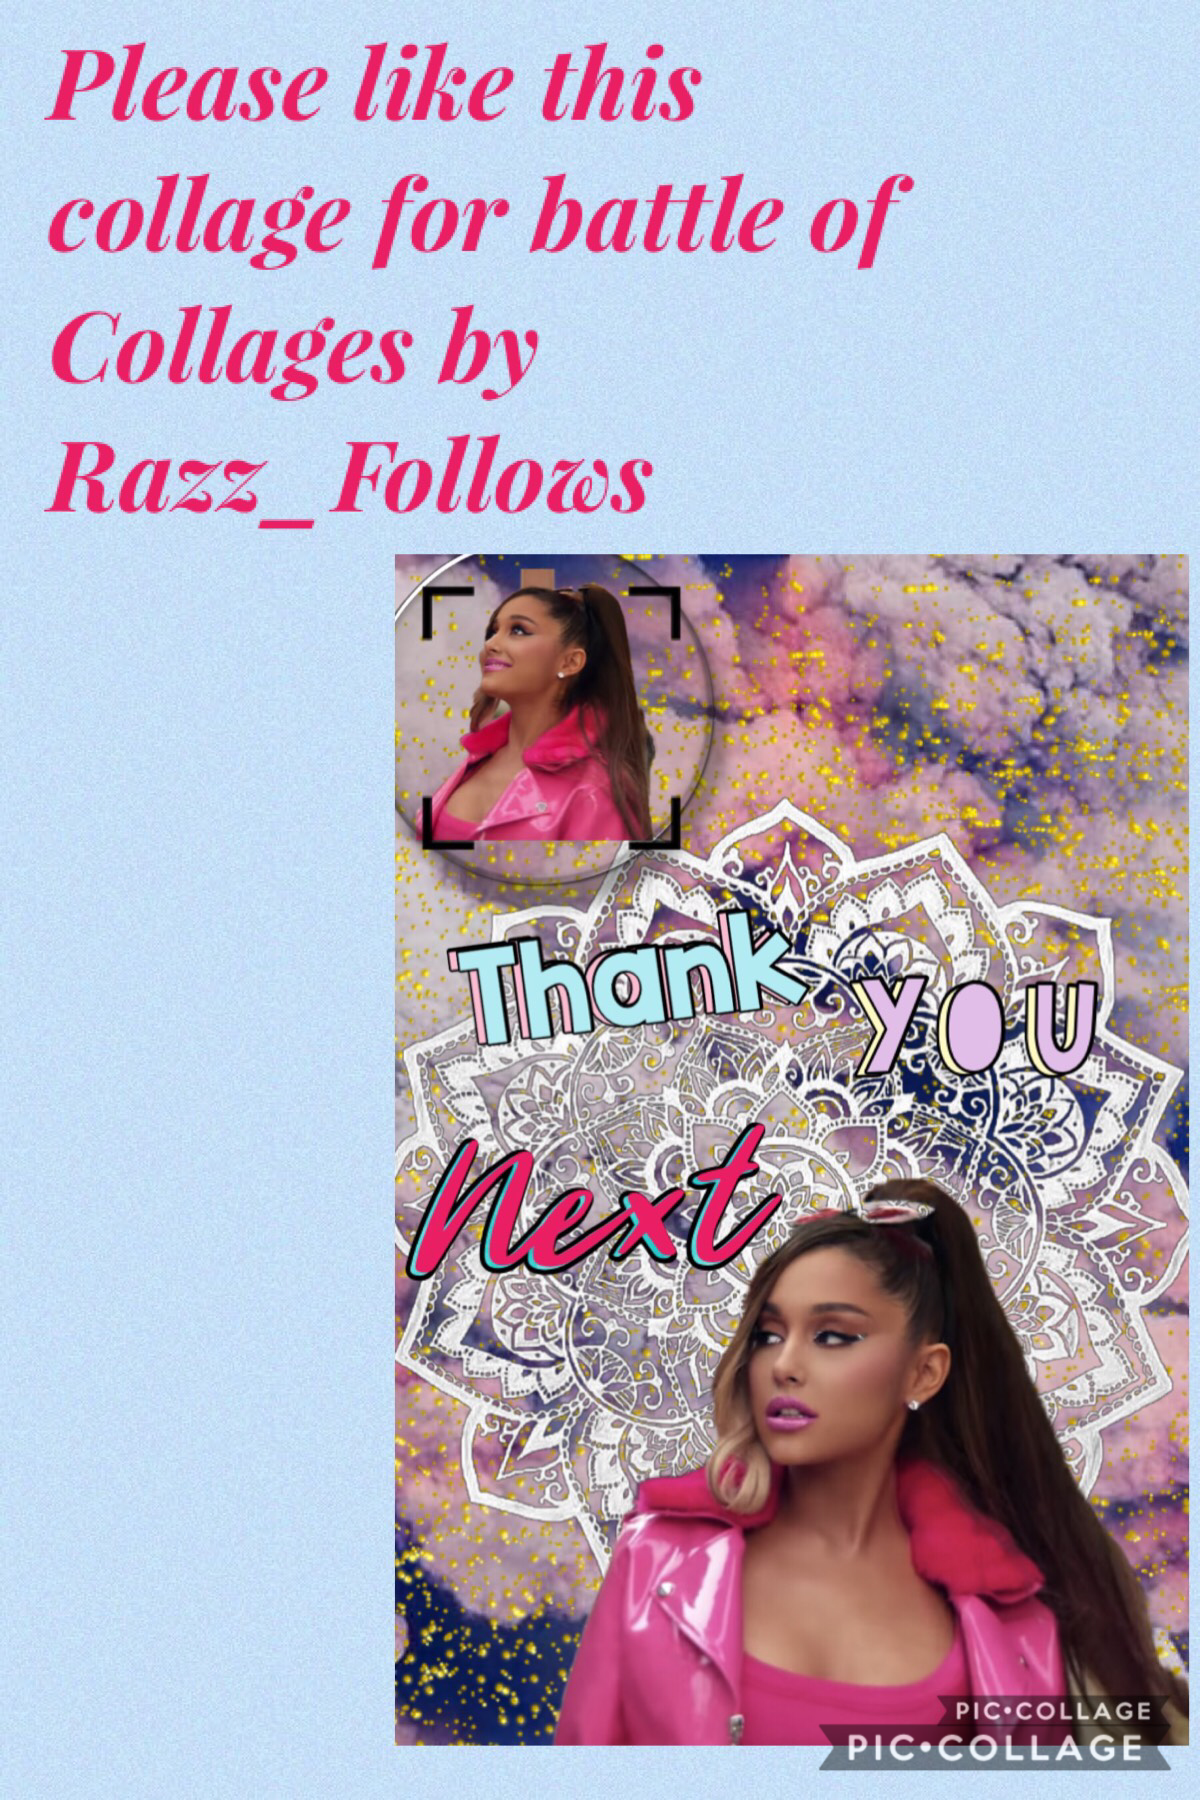 Please like this collage for the battle of collages by Razz_Follow